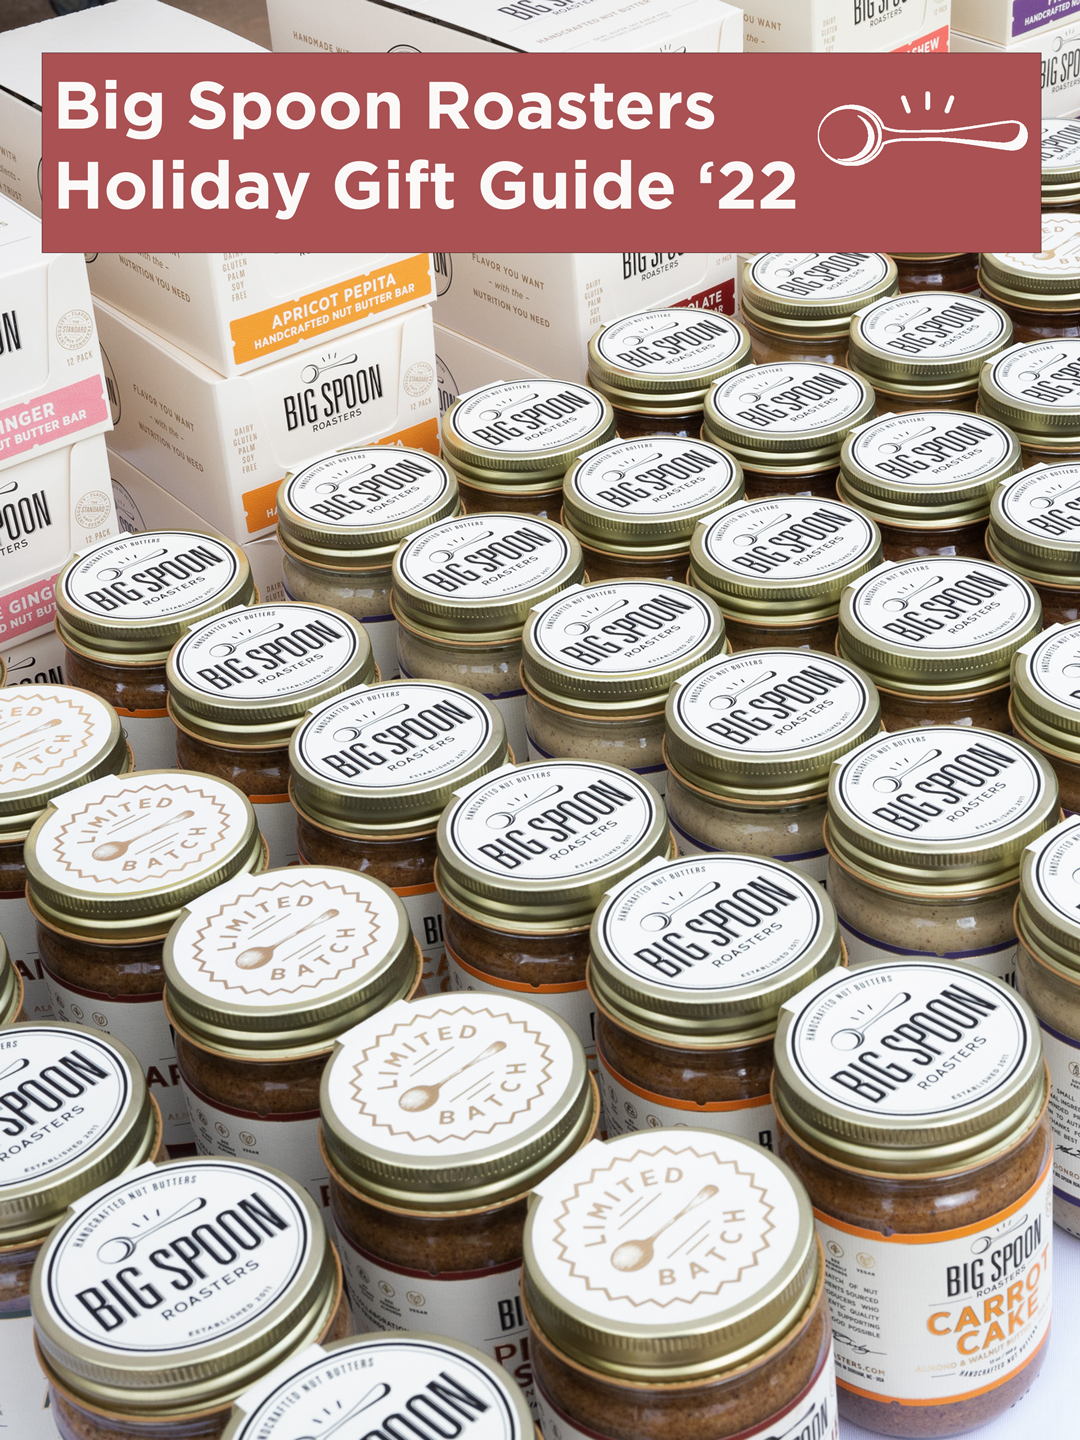 Big Spoon Roasters Holiday Gift Guide '22